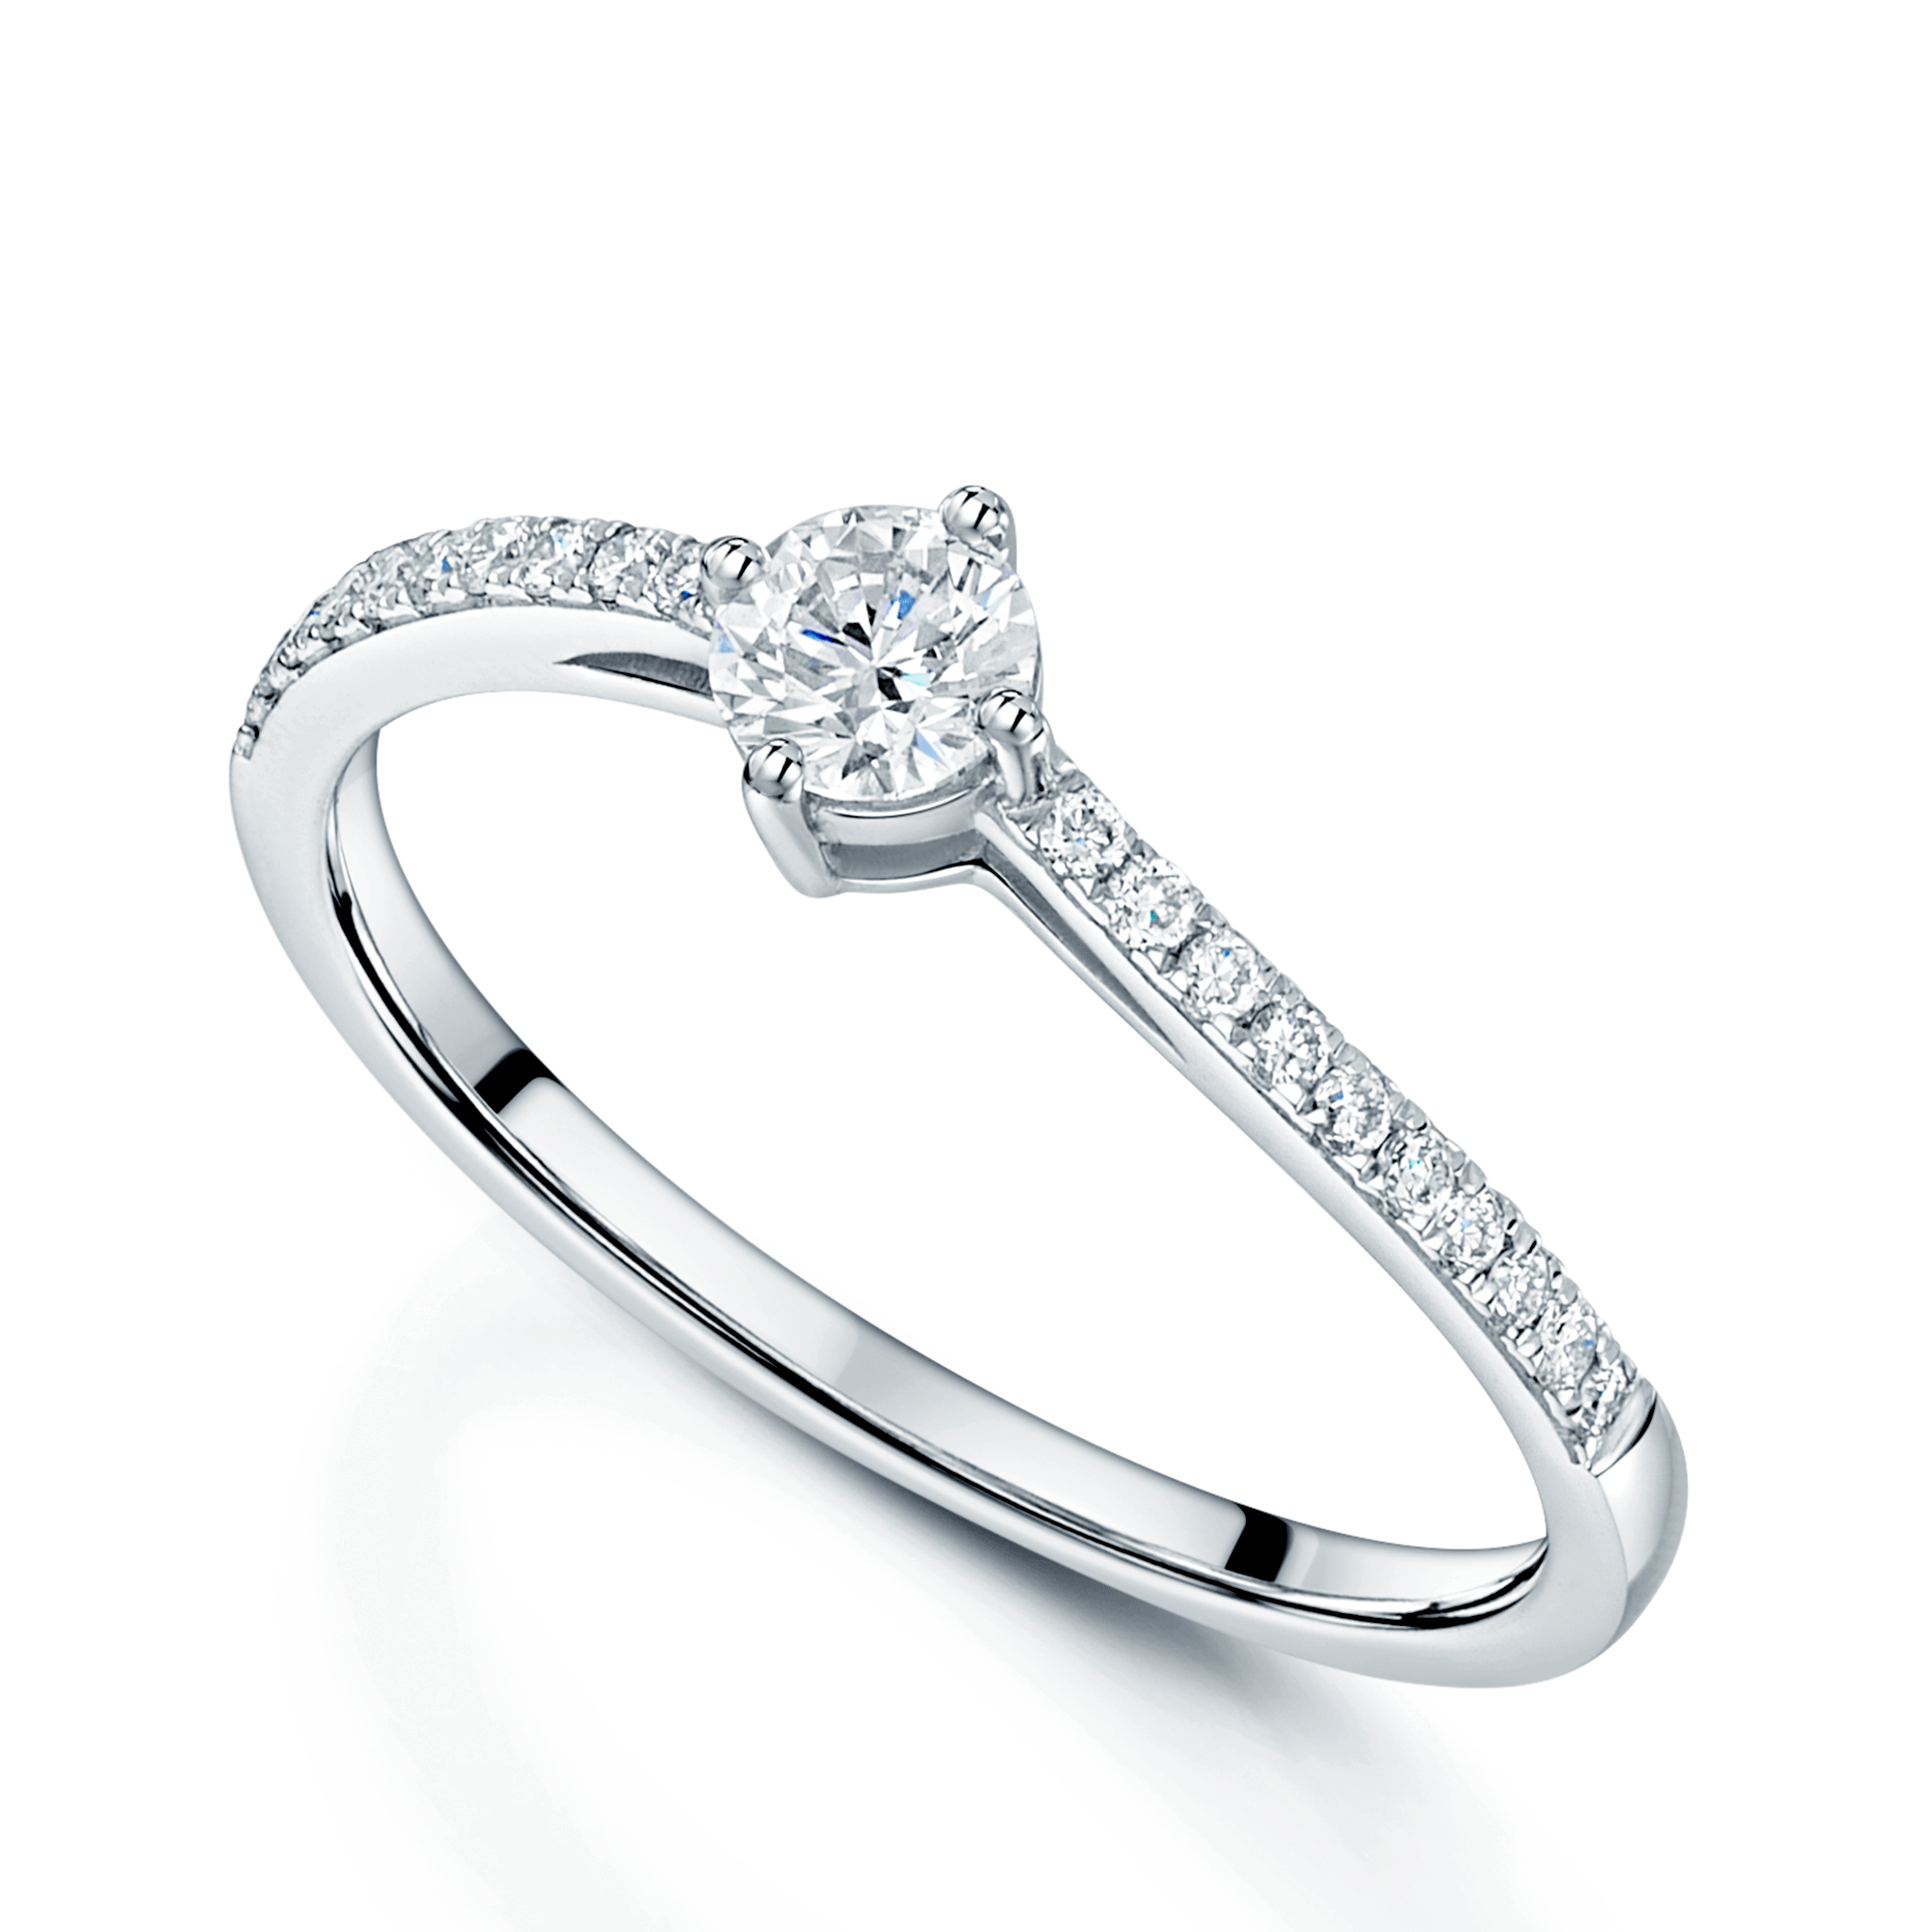 18ct White Gold Diamond Solitaire Ring With Diamond Set Shoulders